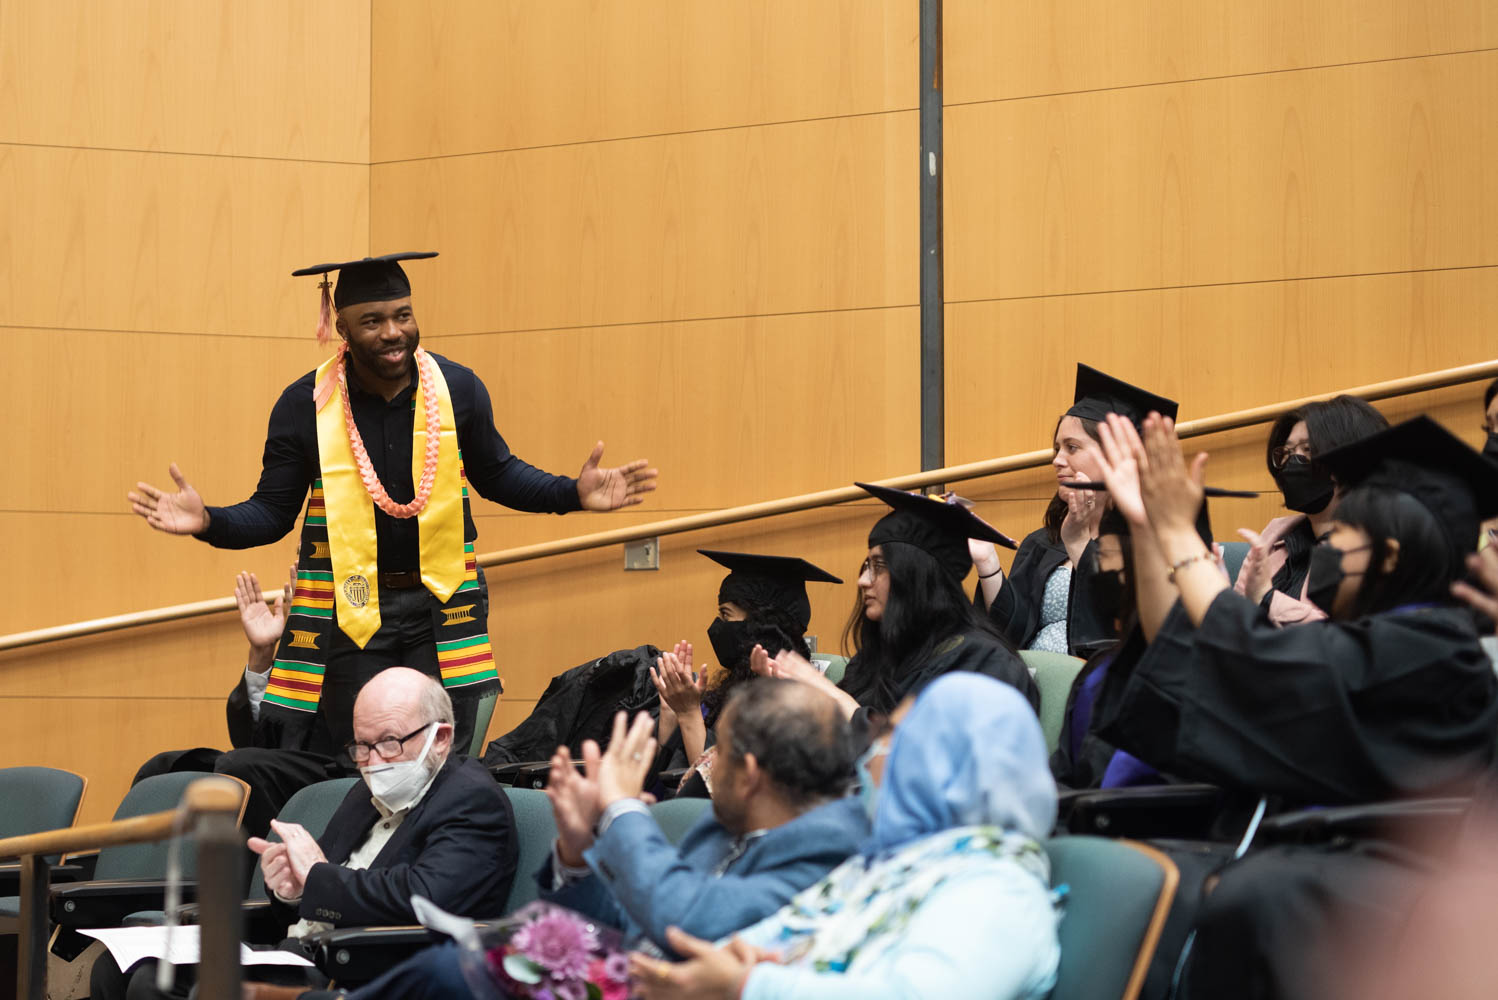 Outstanding Undergraduate Student Amalawa Aiwekhoe acknowledges applause from the audience during the DEOHS graduation ceremony.